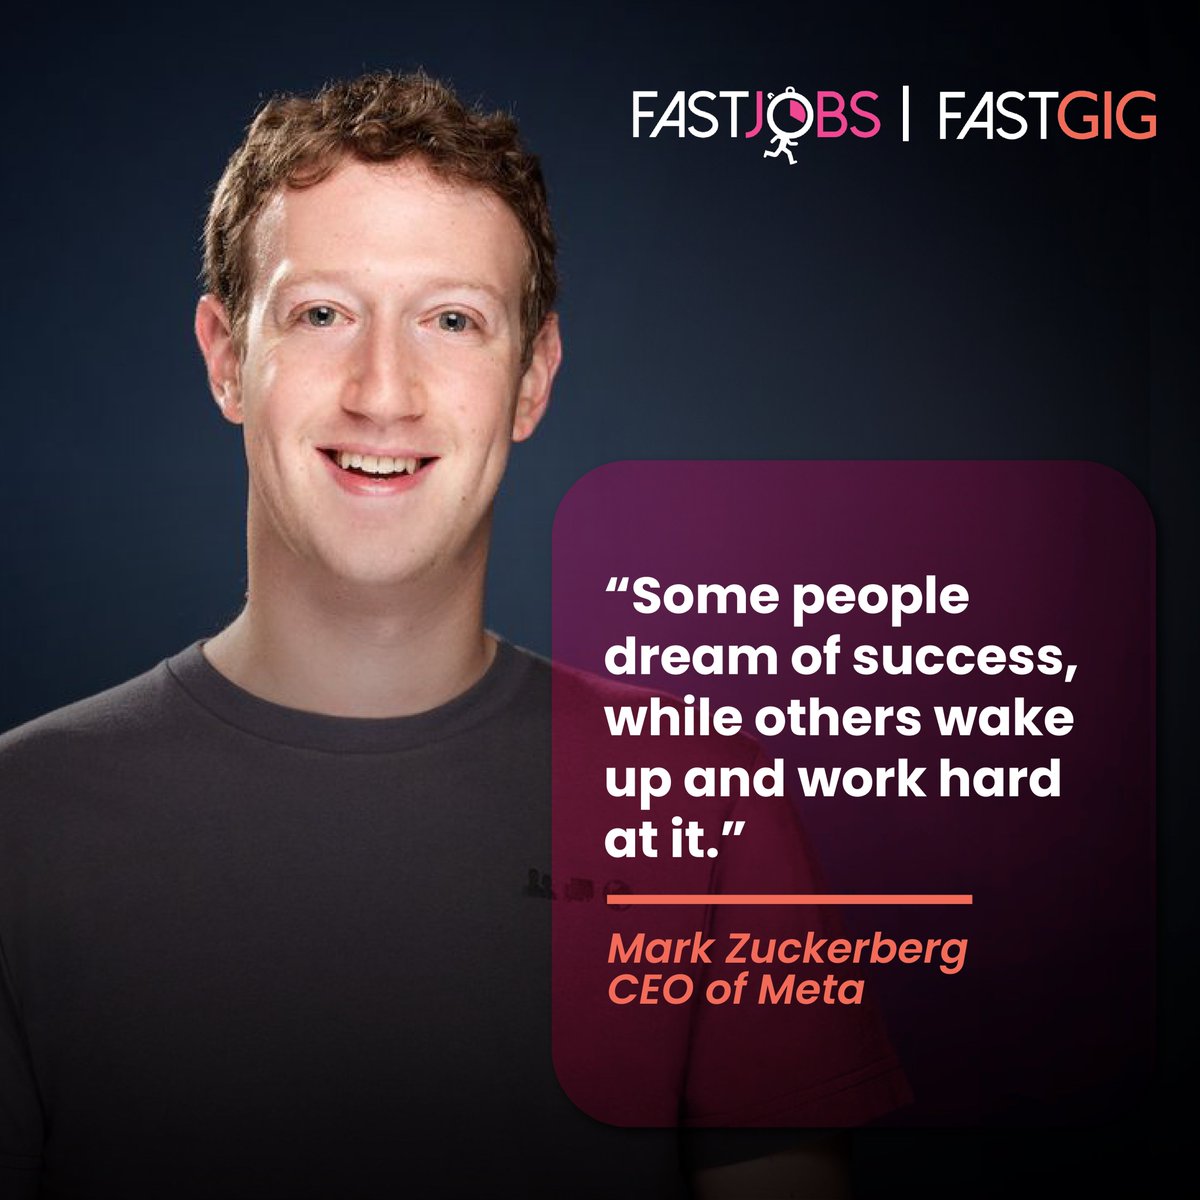 Dreaming of success is easy; waking up and working hard for it is what sets you apart. 💼🔥
#CareerAmbition #HardWorkPaysOff #MarkZuckerberg #SuccessMindset #DreamBig #fastjobs #fastgig